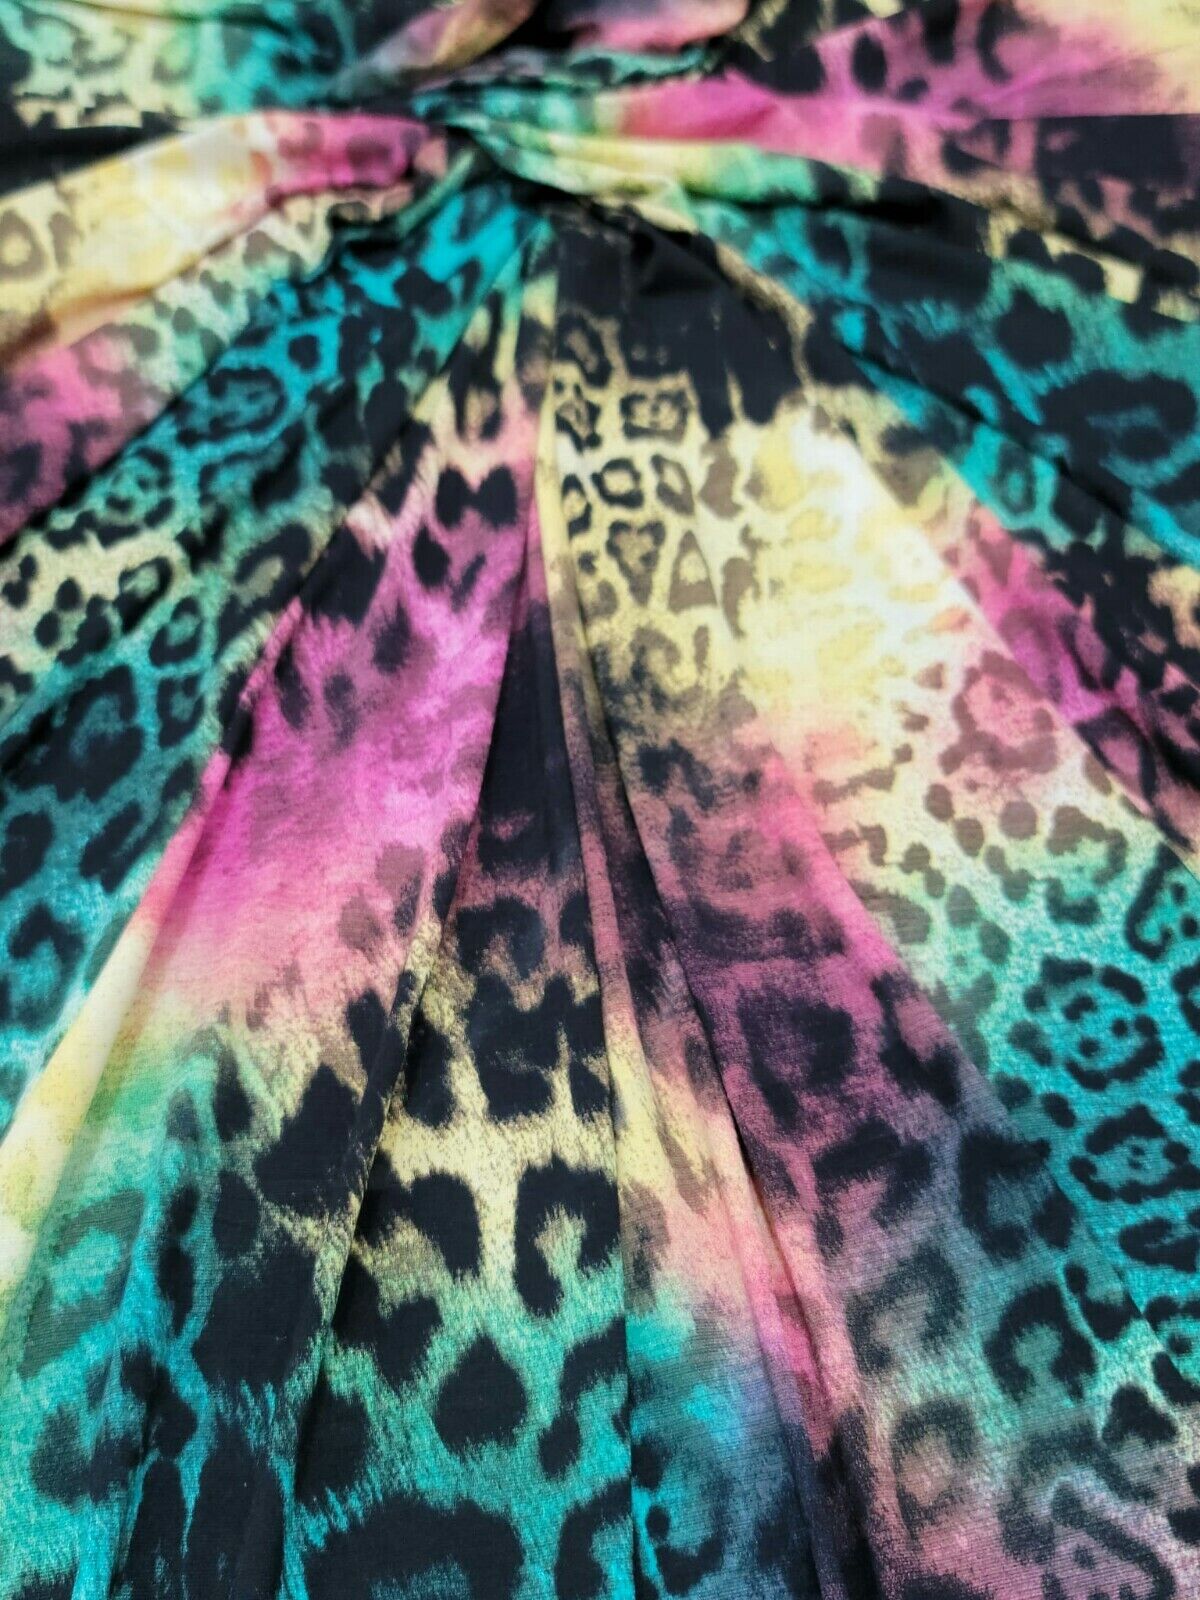 Multicolor Cheetah Stretch Fabric - Sold By the Yard - Gorgeous Spandex Material